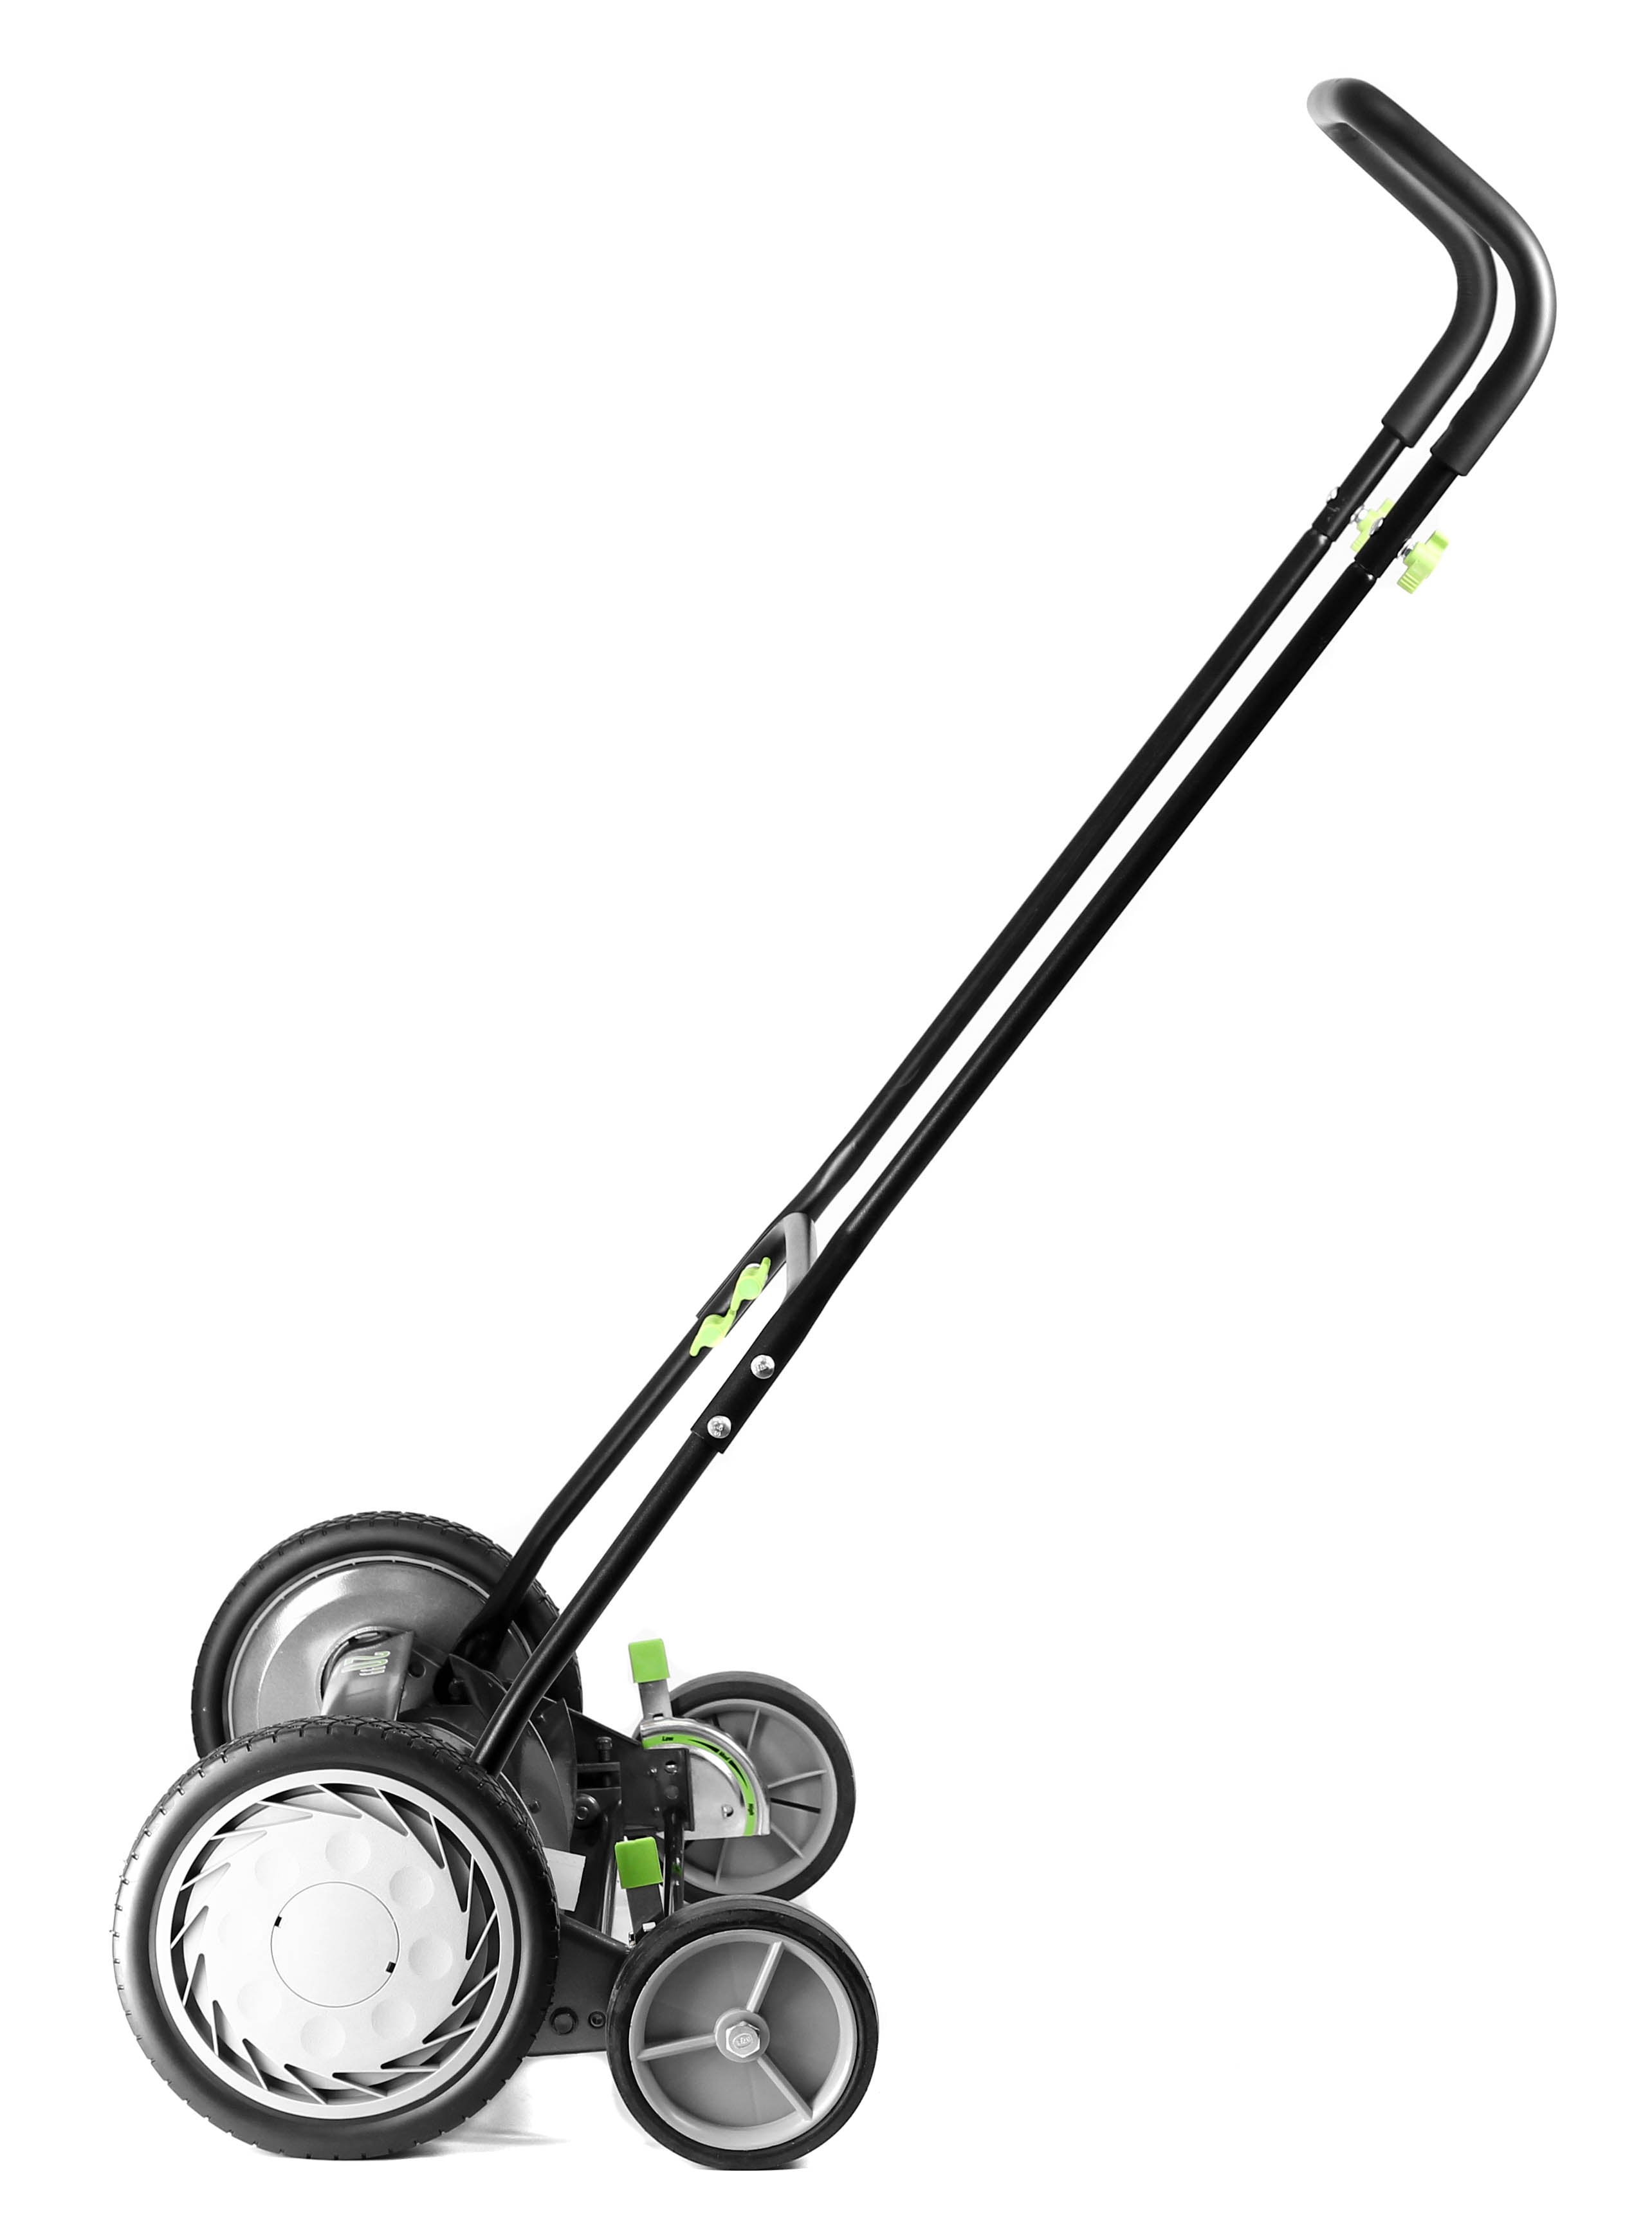 Earthwise Power Tools by ALM 10 20V 2Ah Lithium String Trimmer – American  Lawn Mower Co. EST 1895